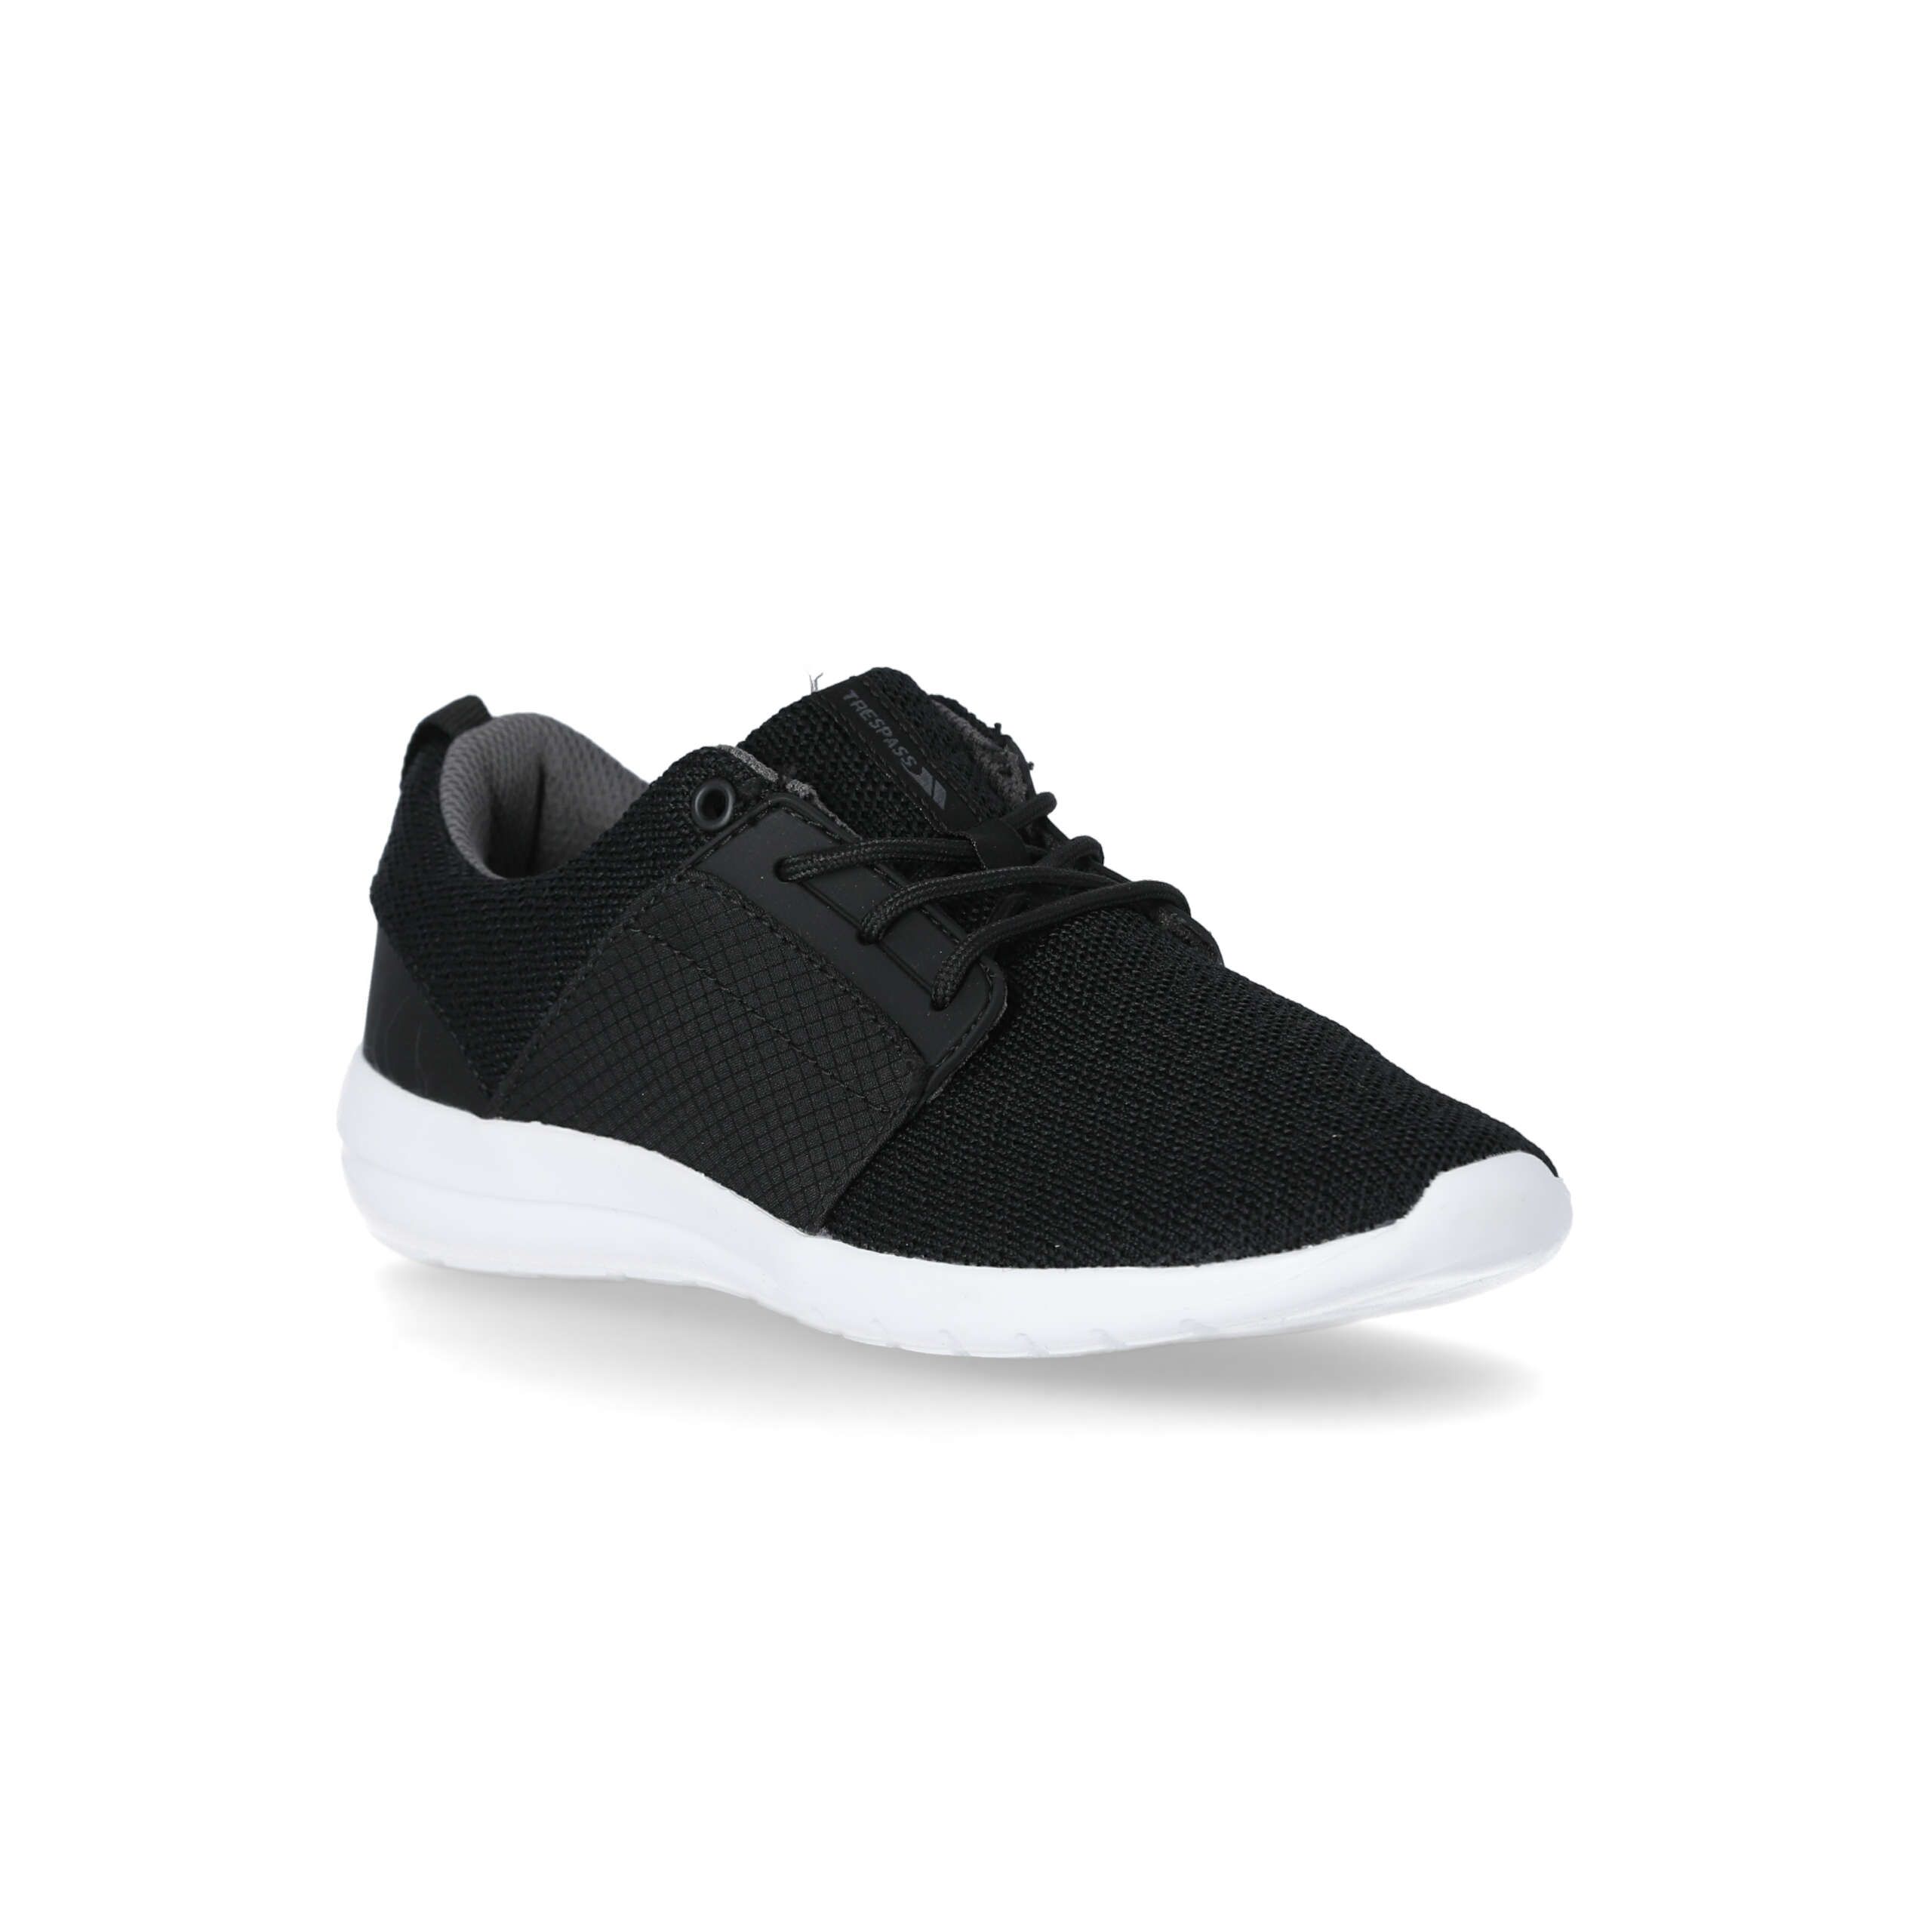 Elwood Youths Lightweight Trainers